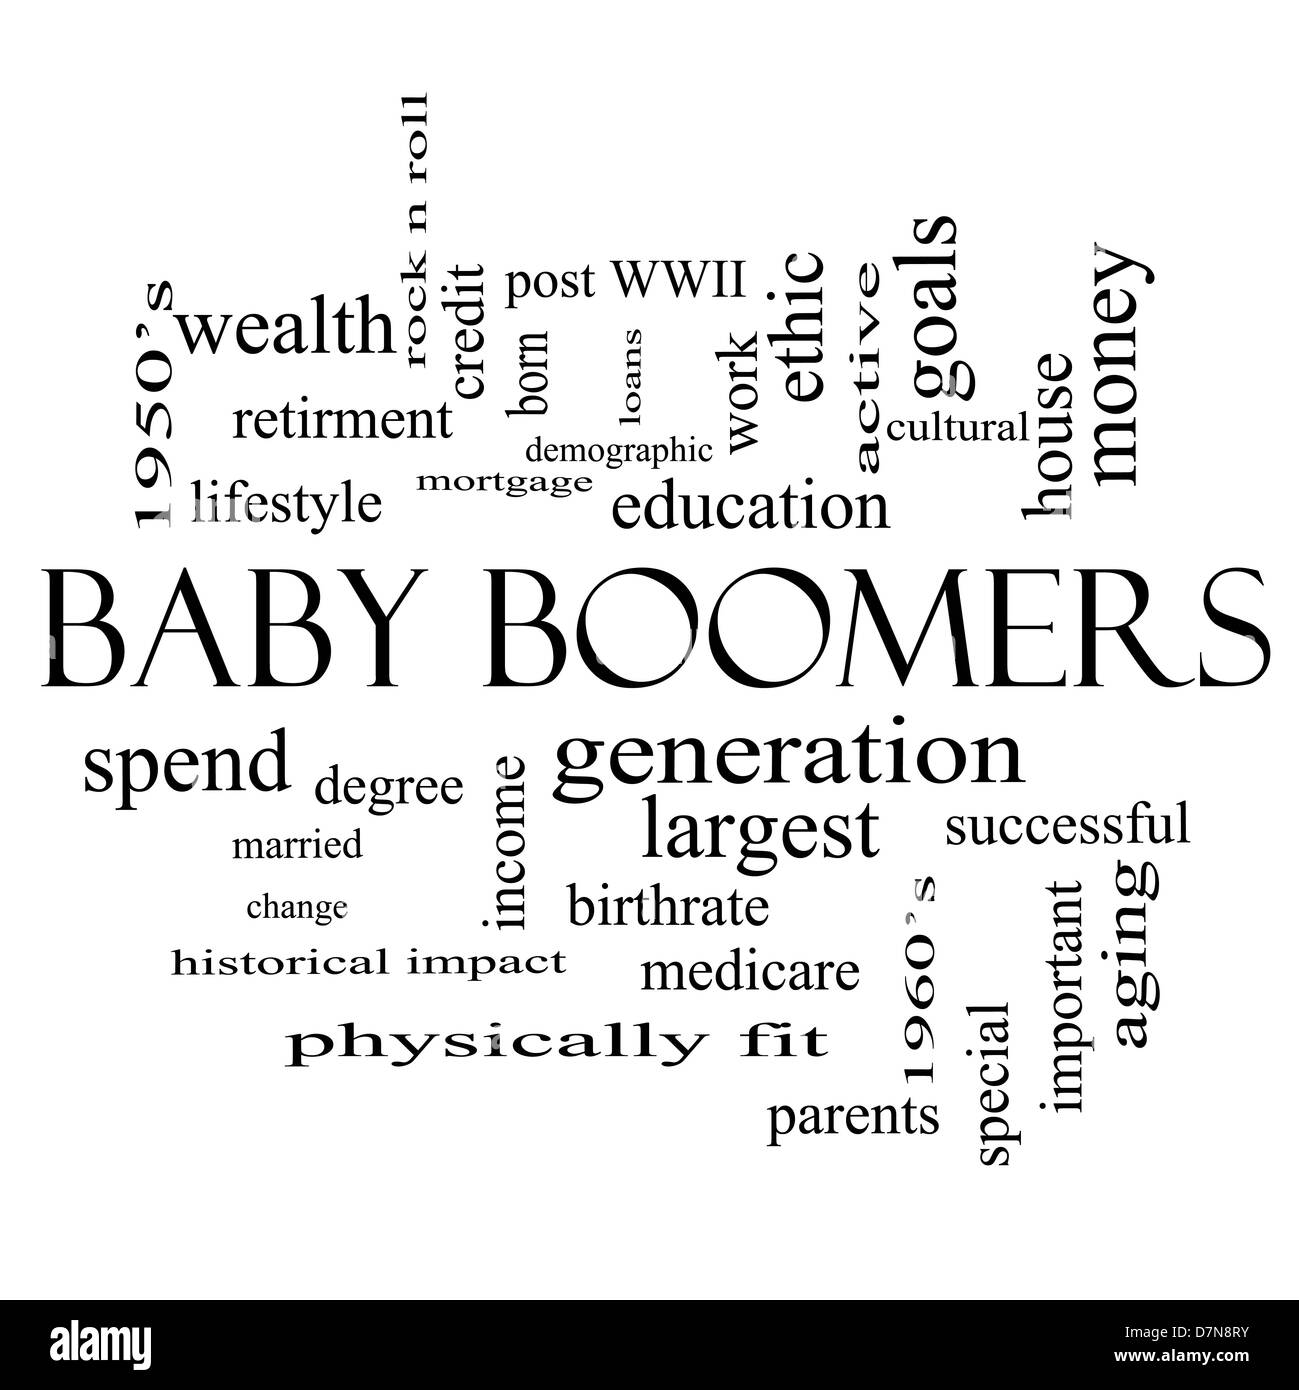 Baby Boomers Word Cloud Concept in black and white with great terms such as generation, largest, demographic and more. Stock Photo